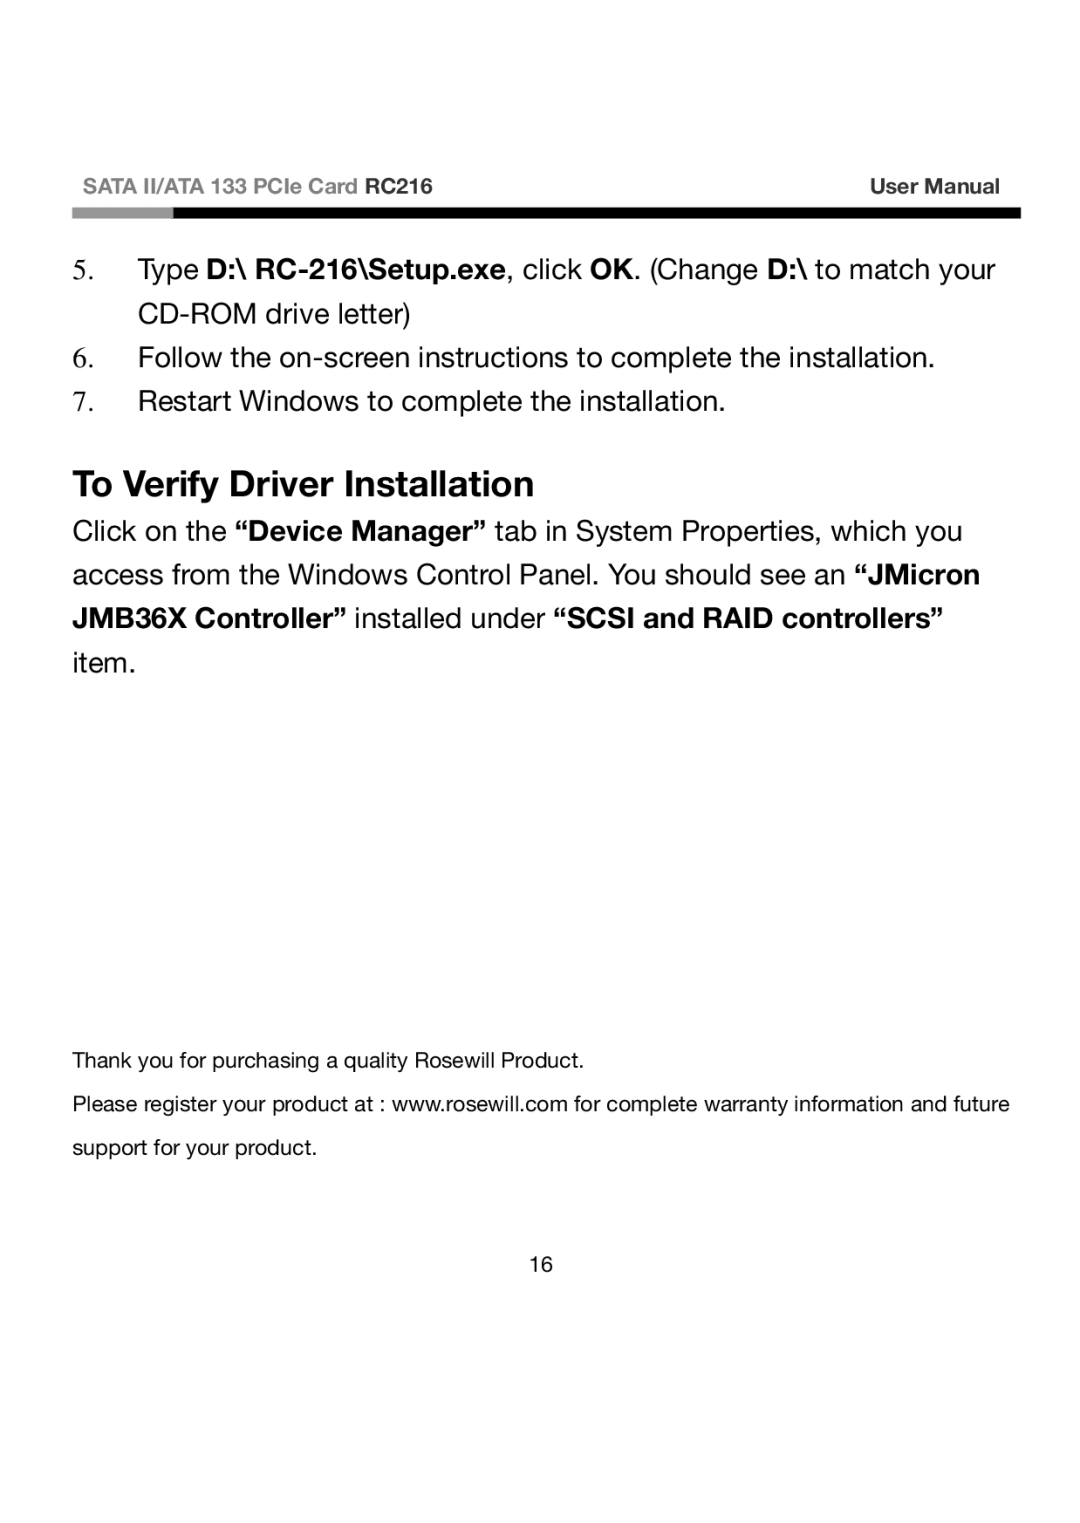 Rosewill RC216 user manual To Verify Driver Installation 